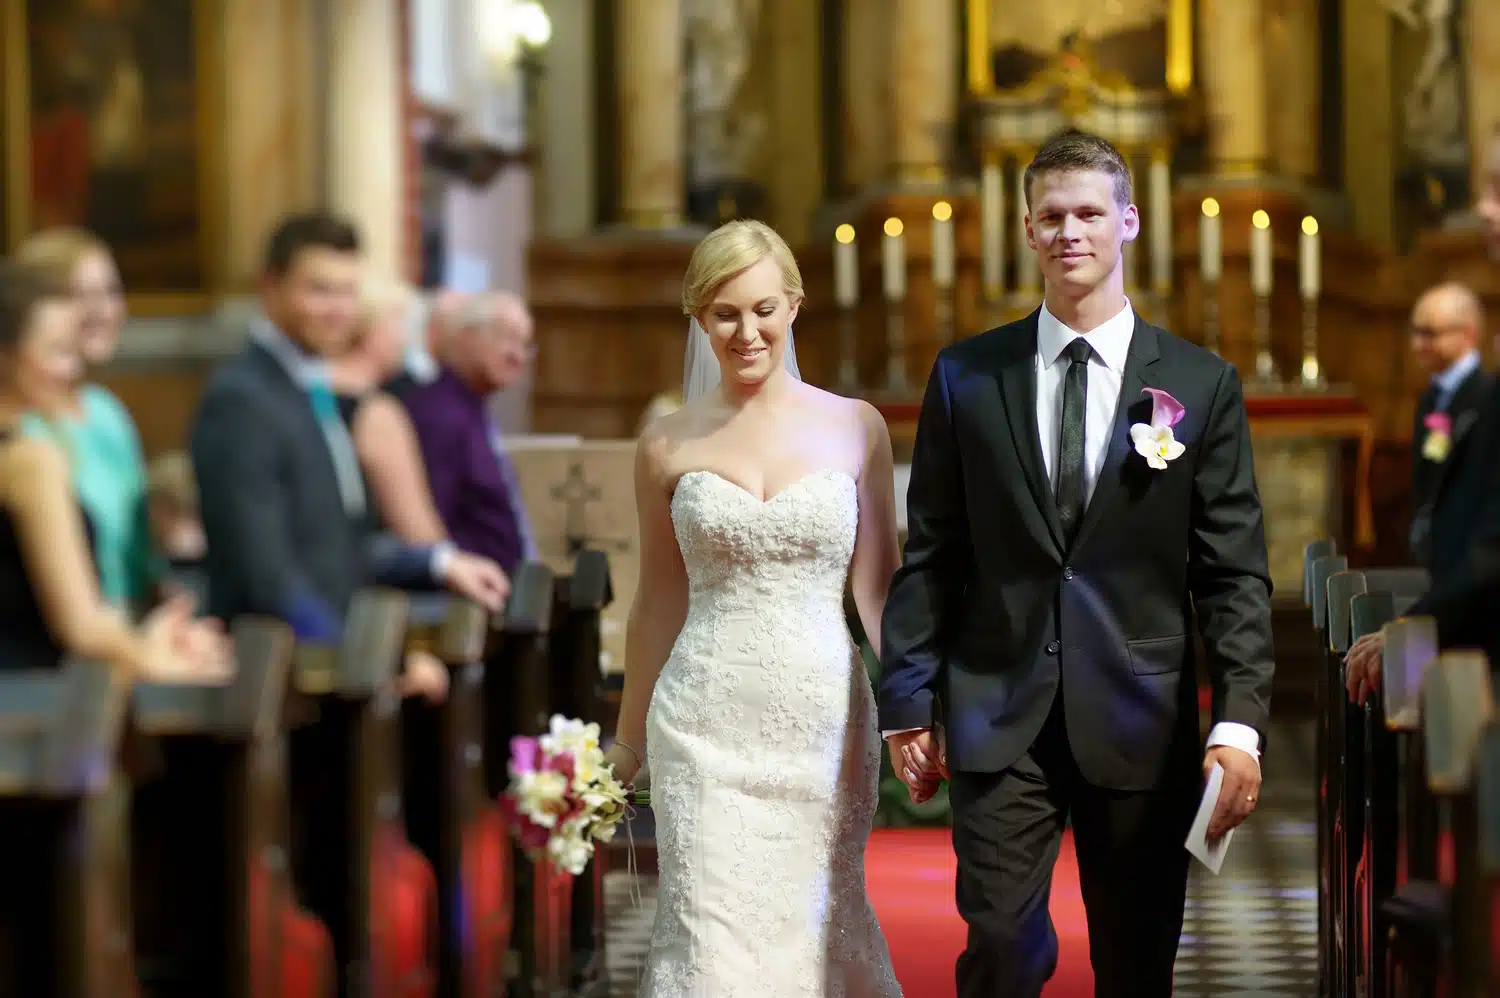 Bride and groom in a church